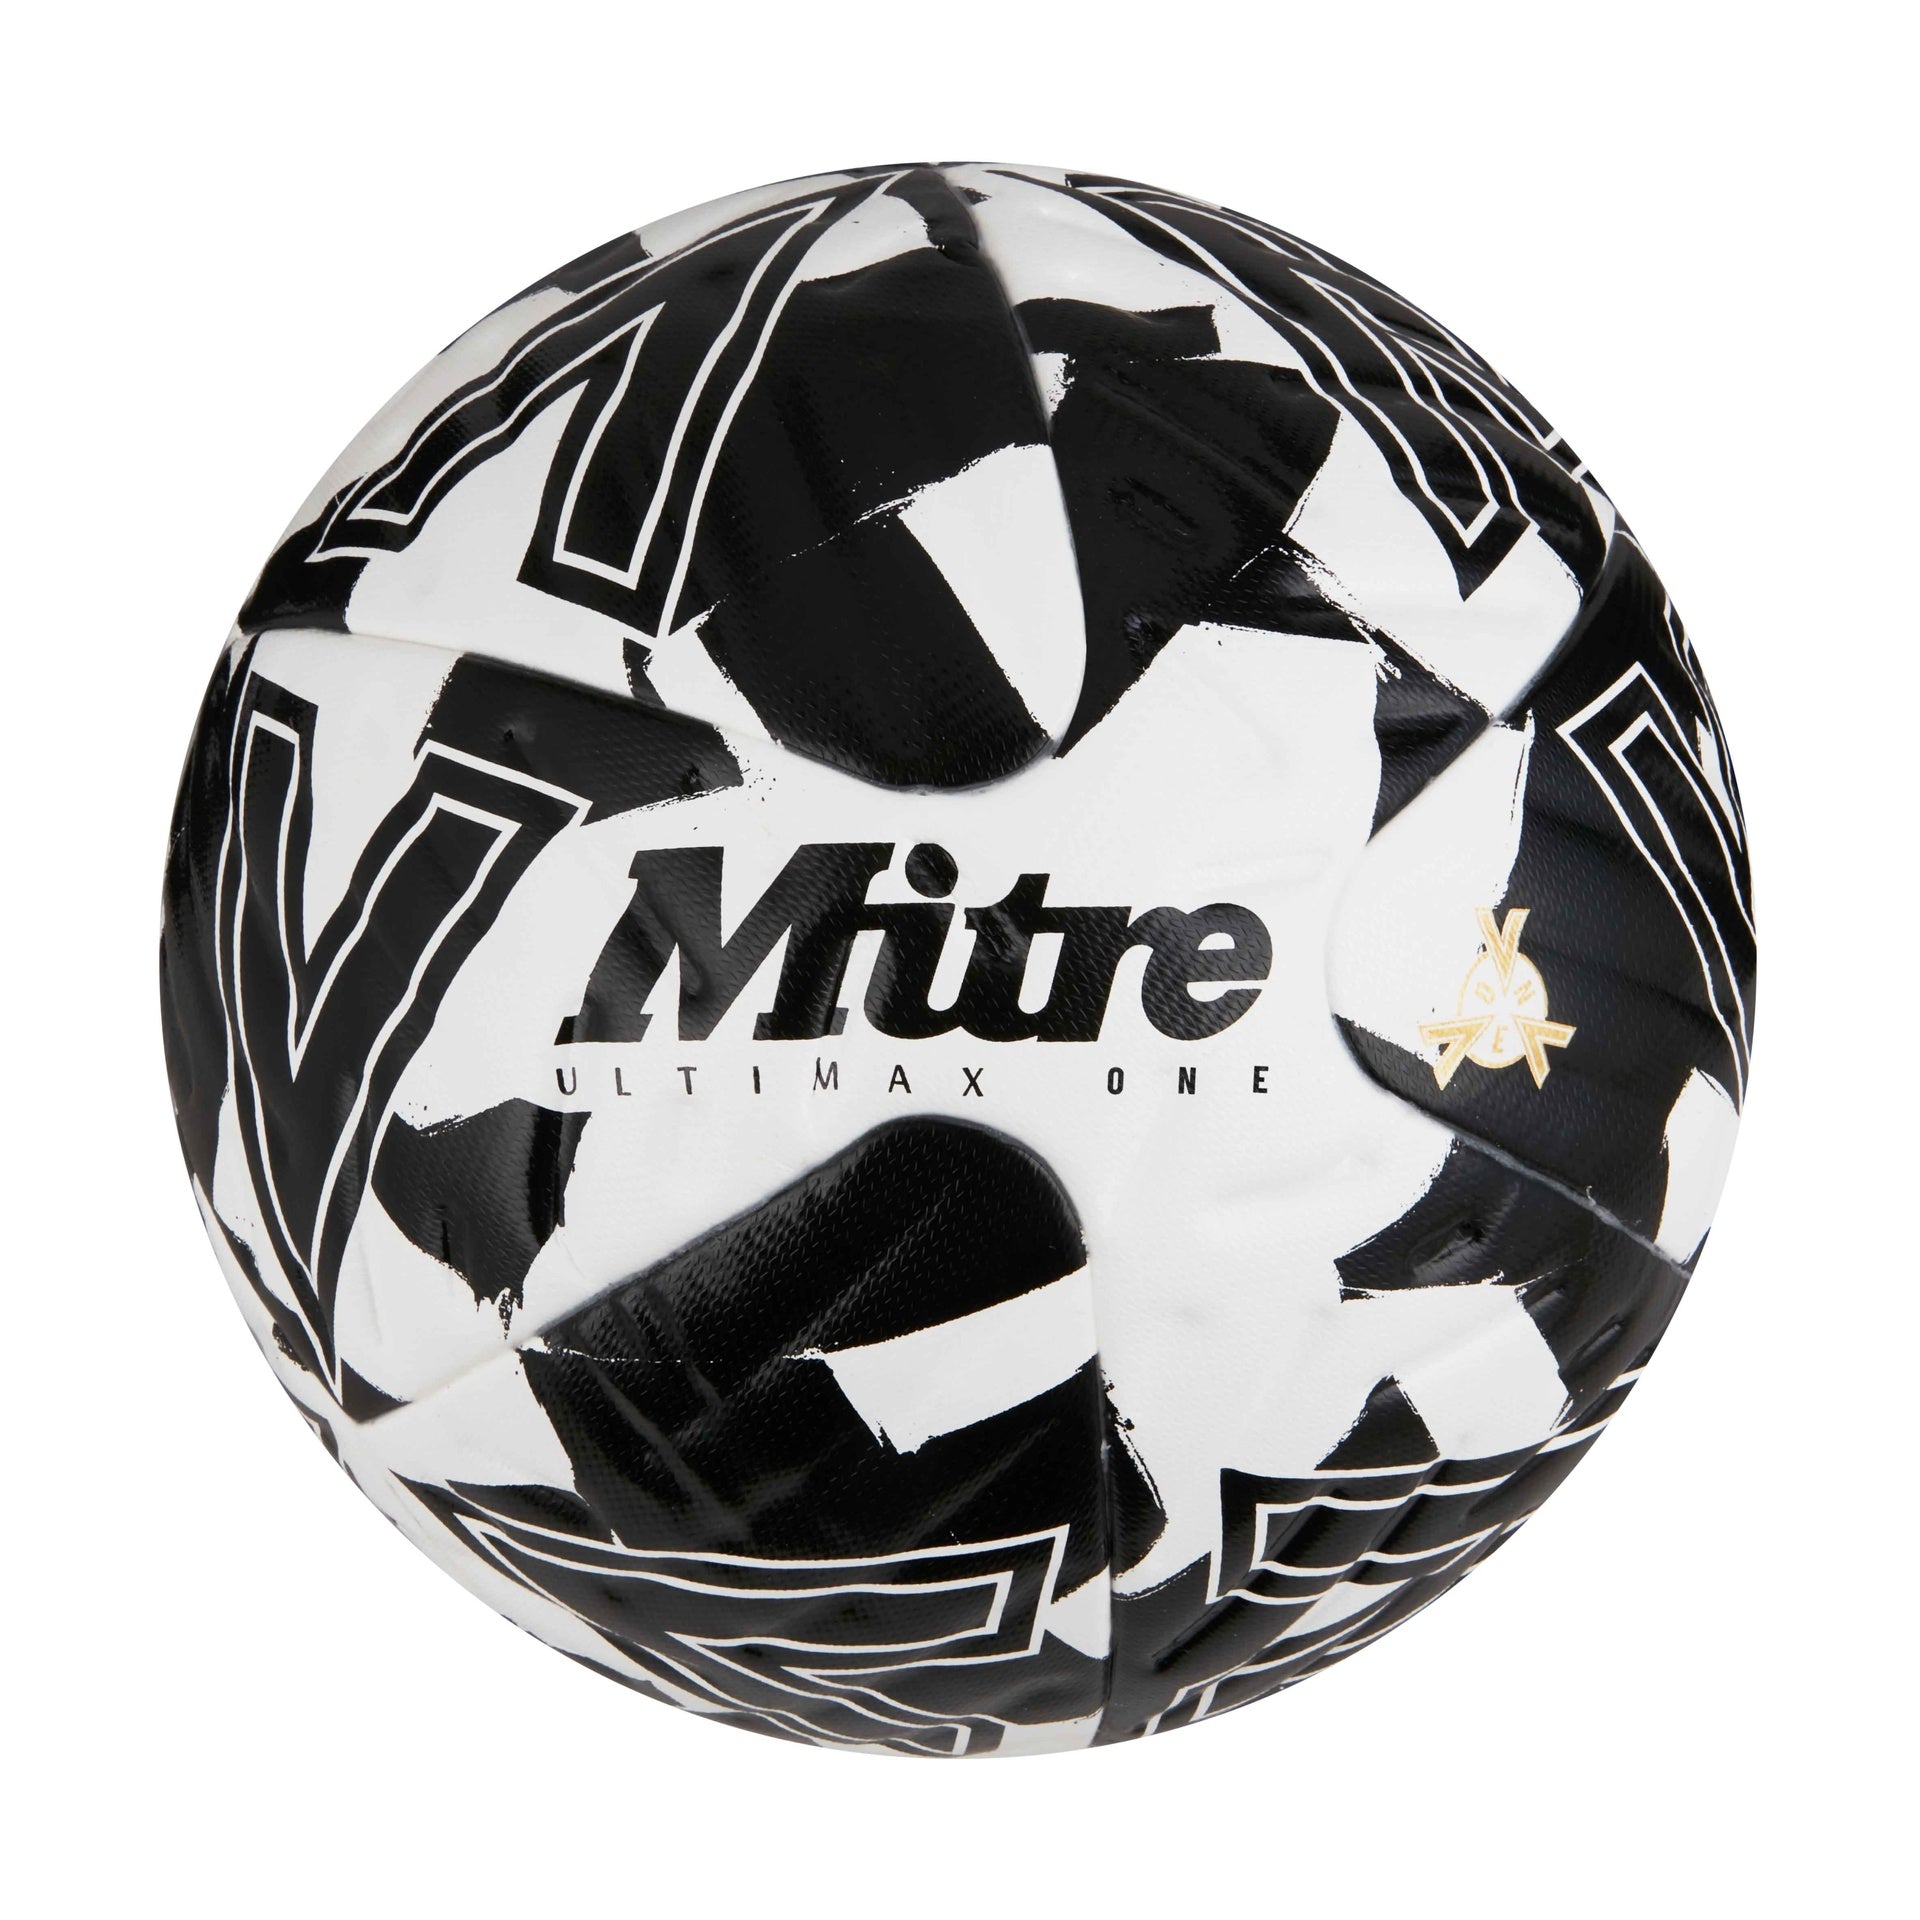 Mitre Ultimax One Football - Sizes 4 & 5 - All colours